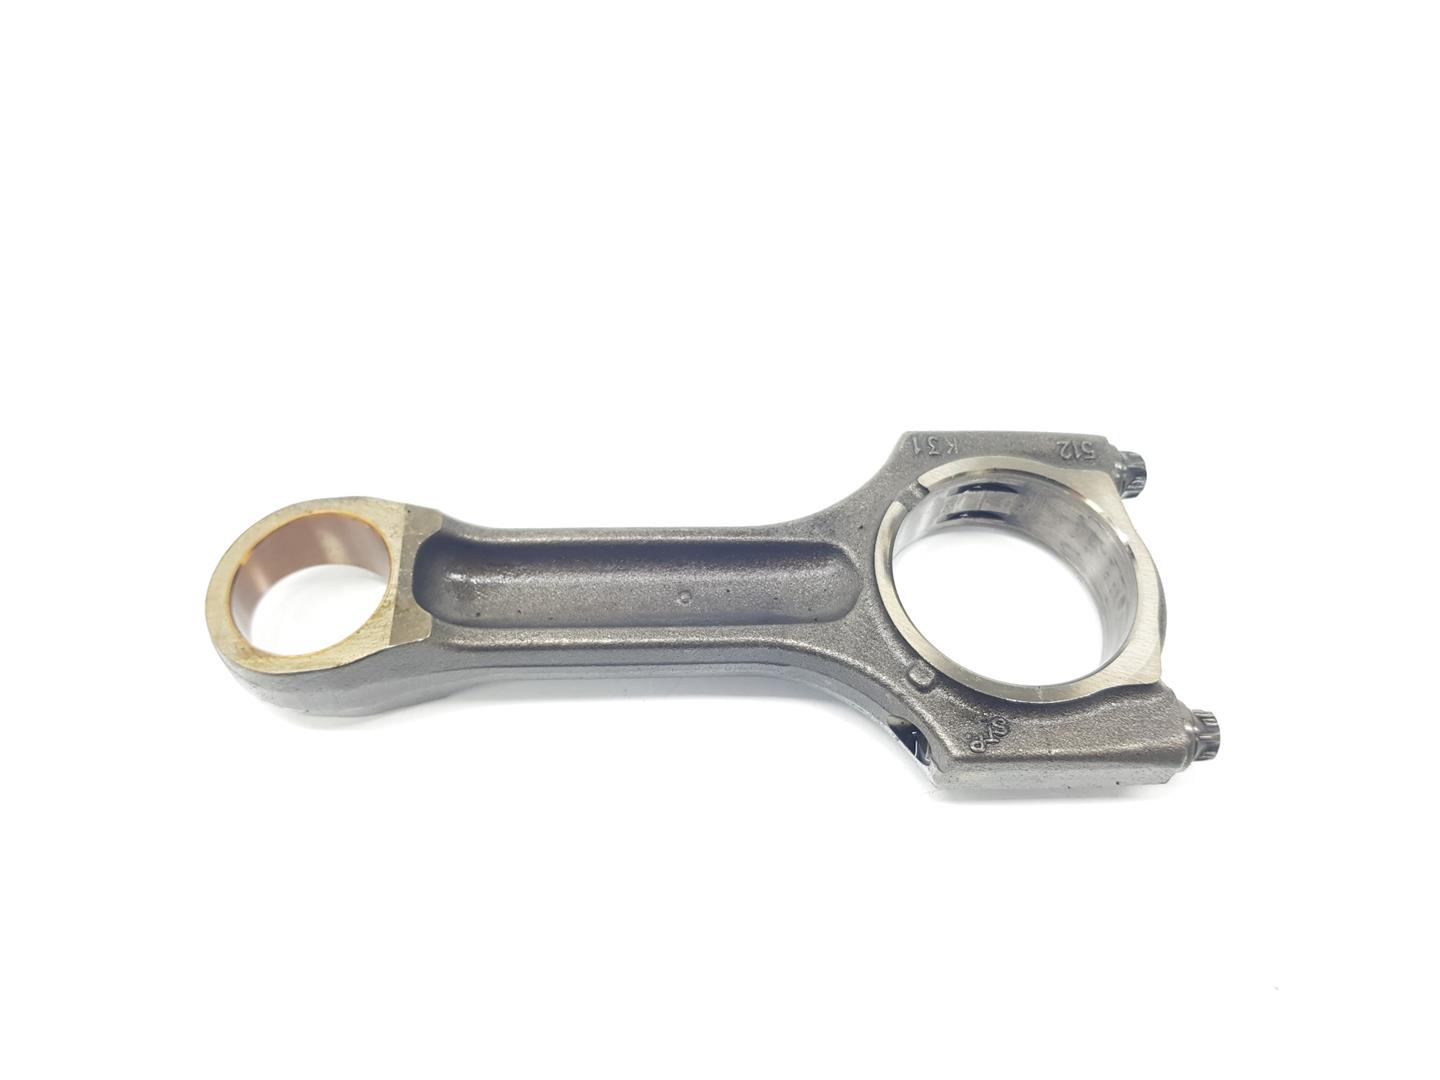 BMW X3 E83 (2003-2010) Connecting Rod 11240308859, 11240308859, 1111AA 24230051